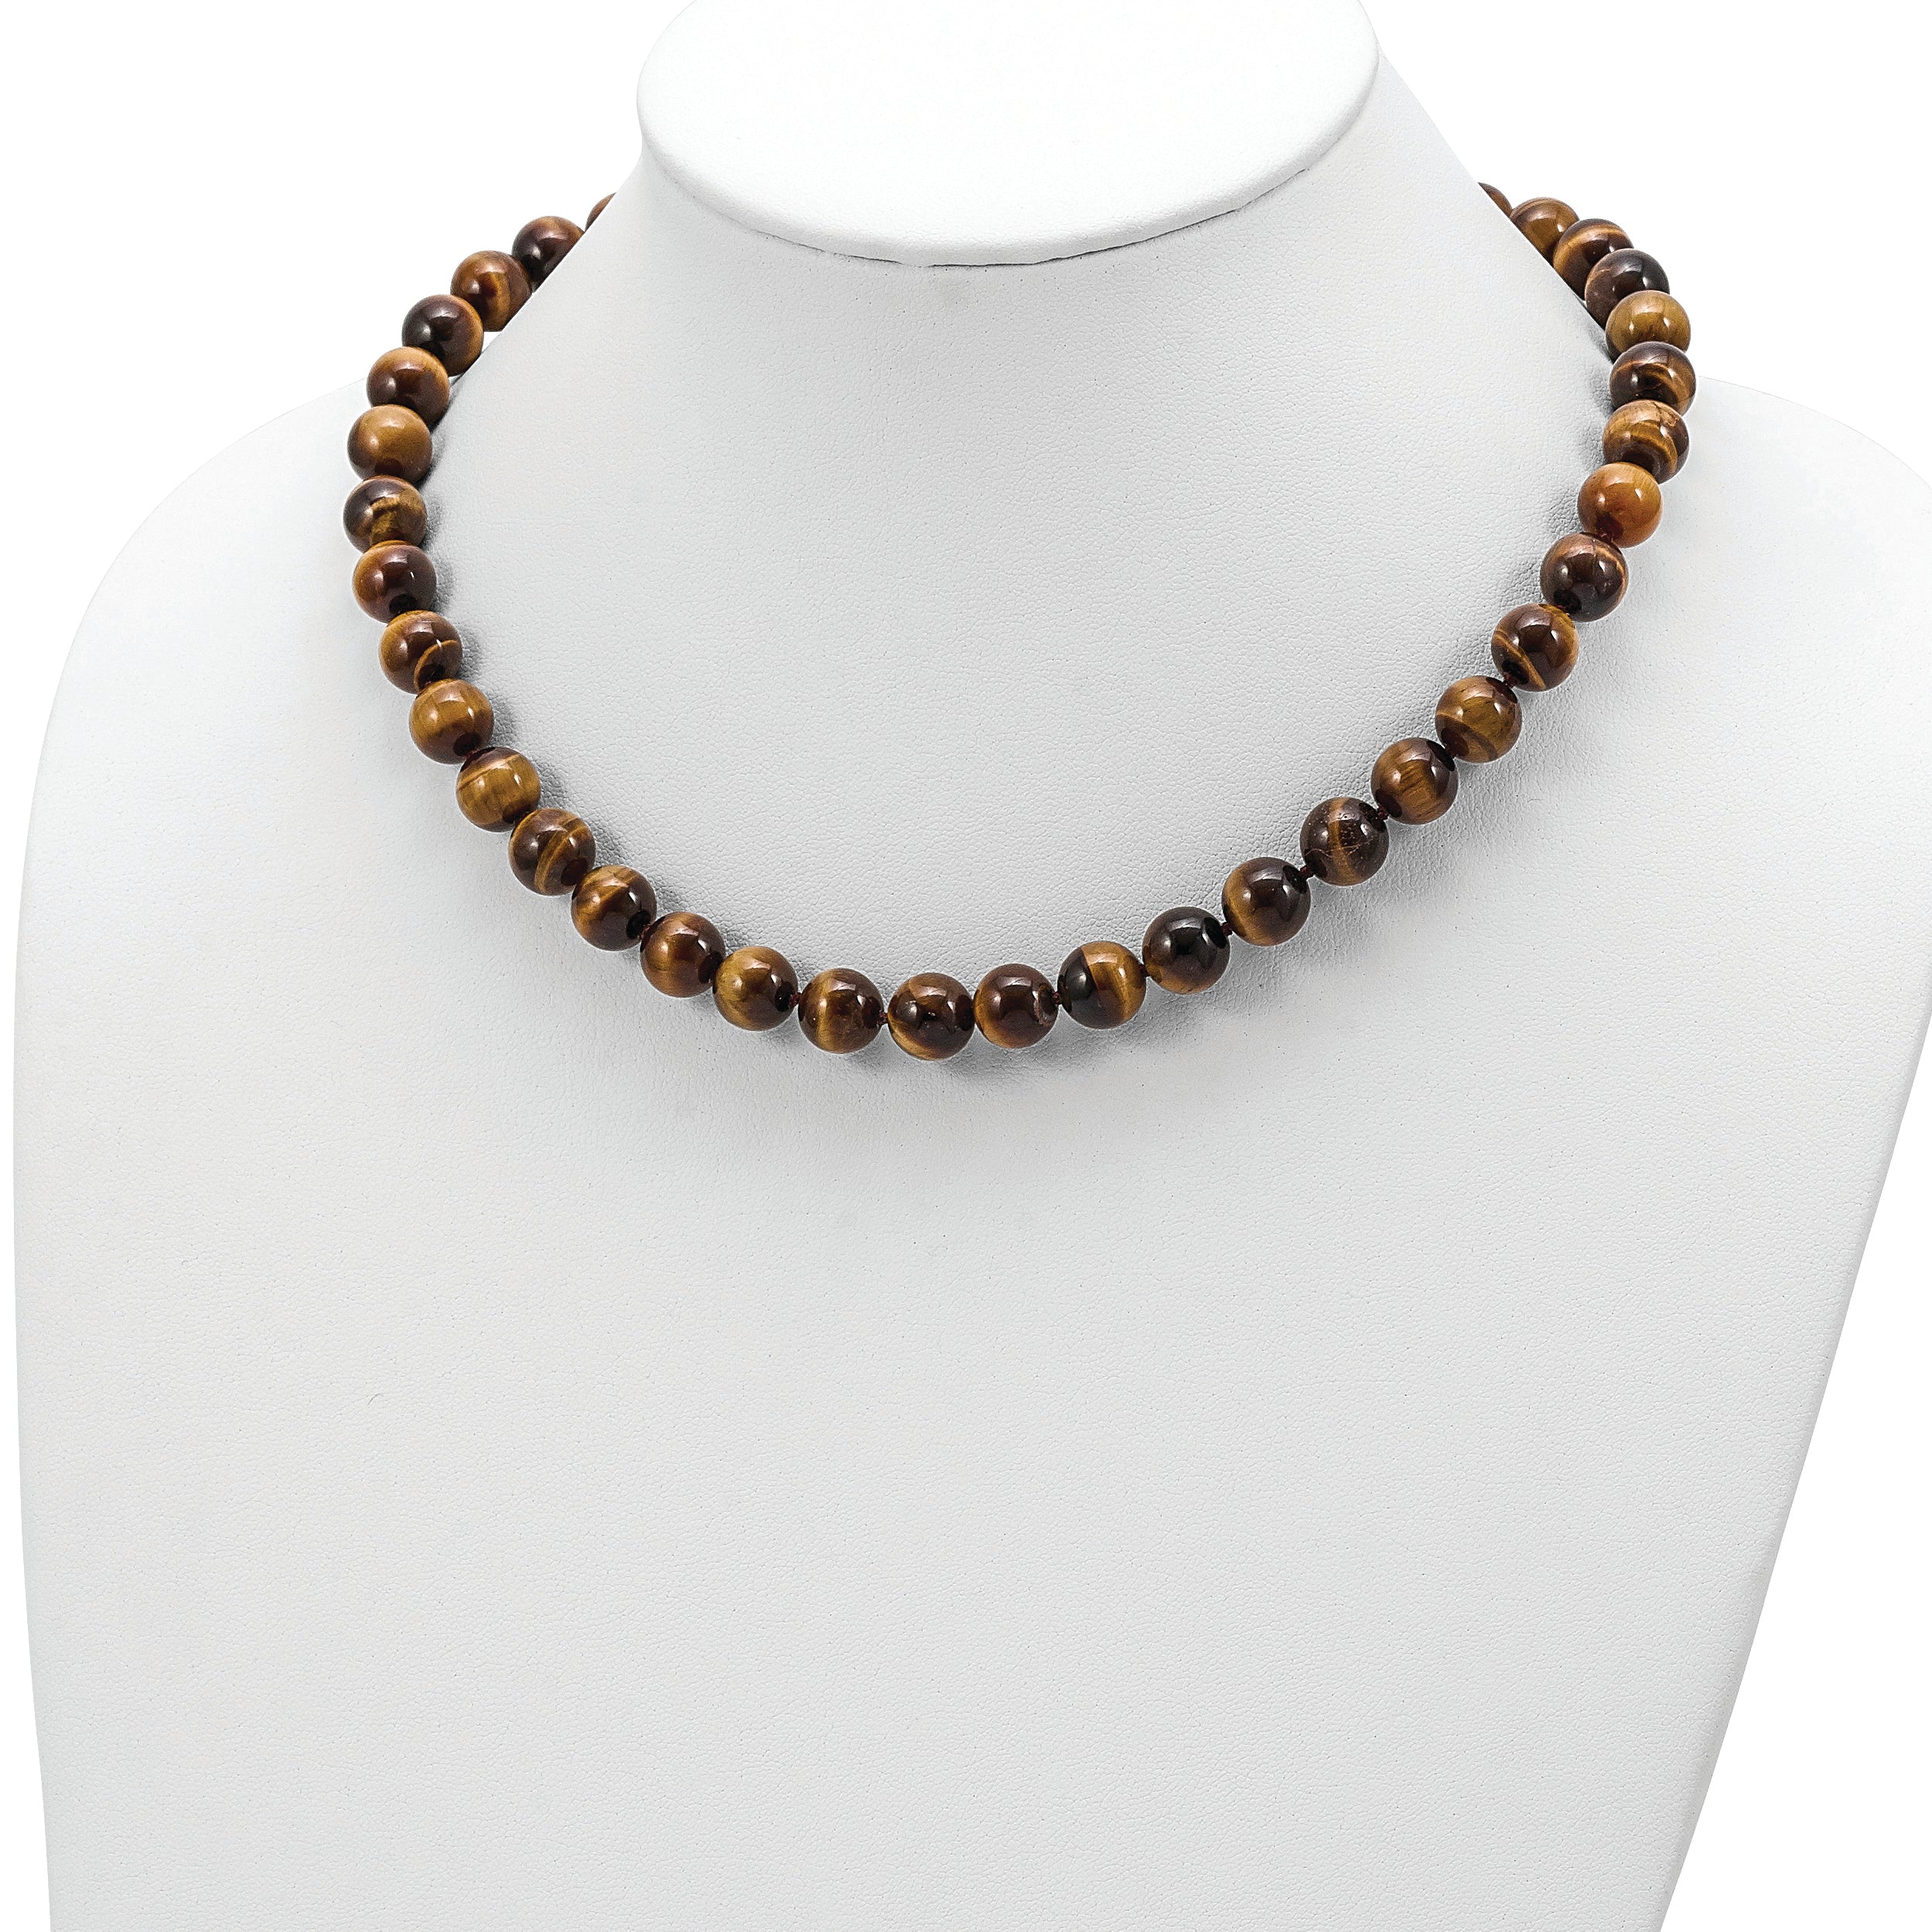 10-10.5mm Smooth Beaded Tiger Eye Necklace w/Sterling S.RH Clasp